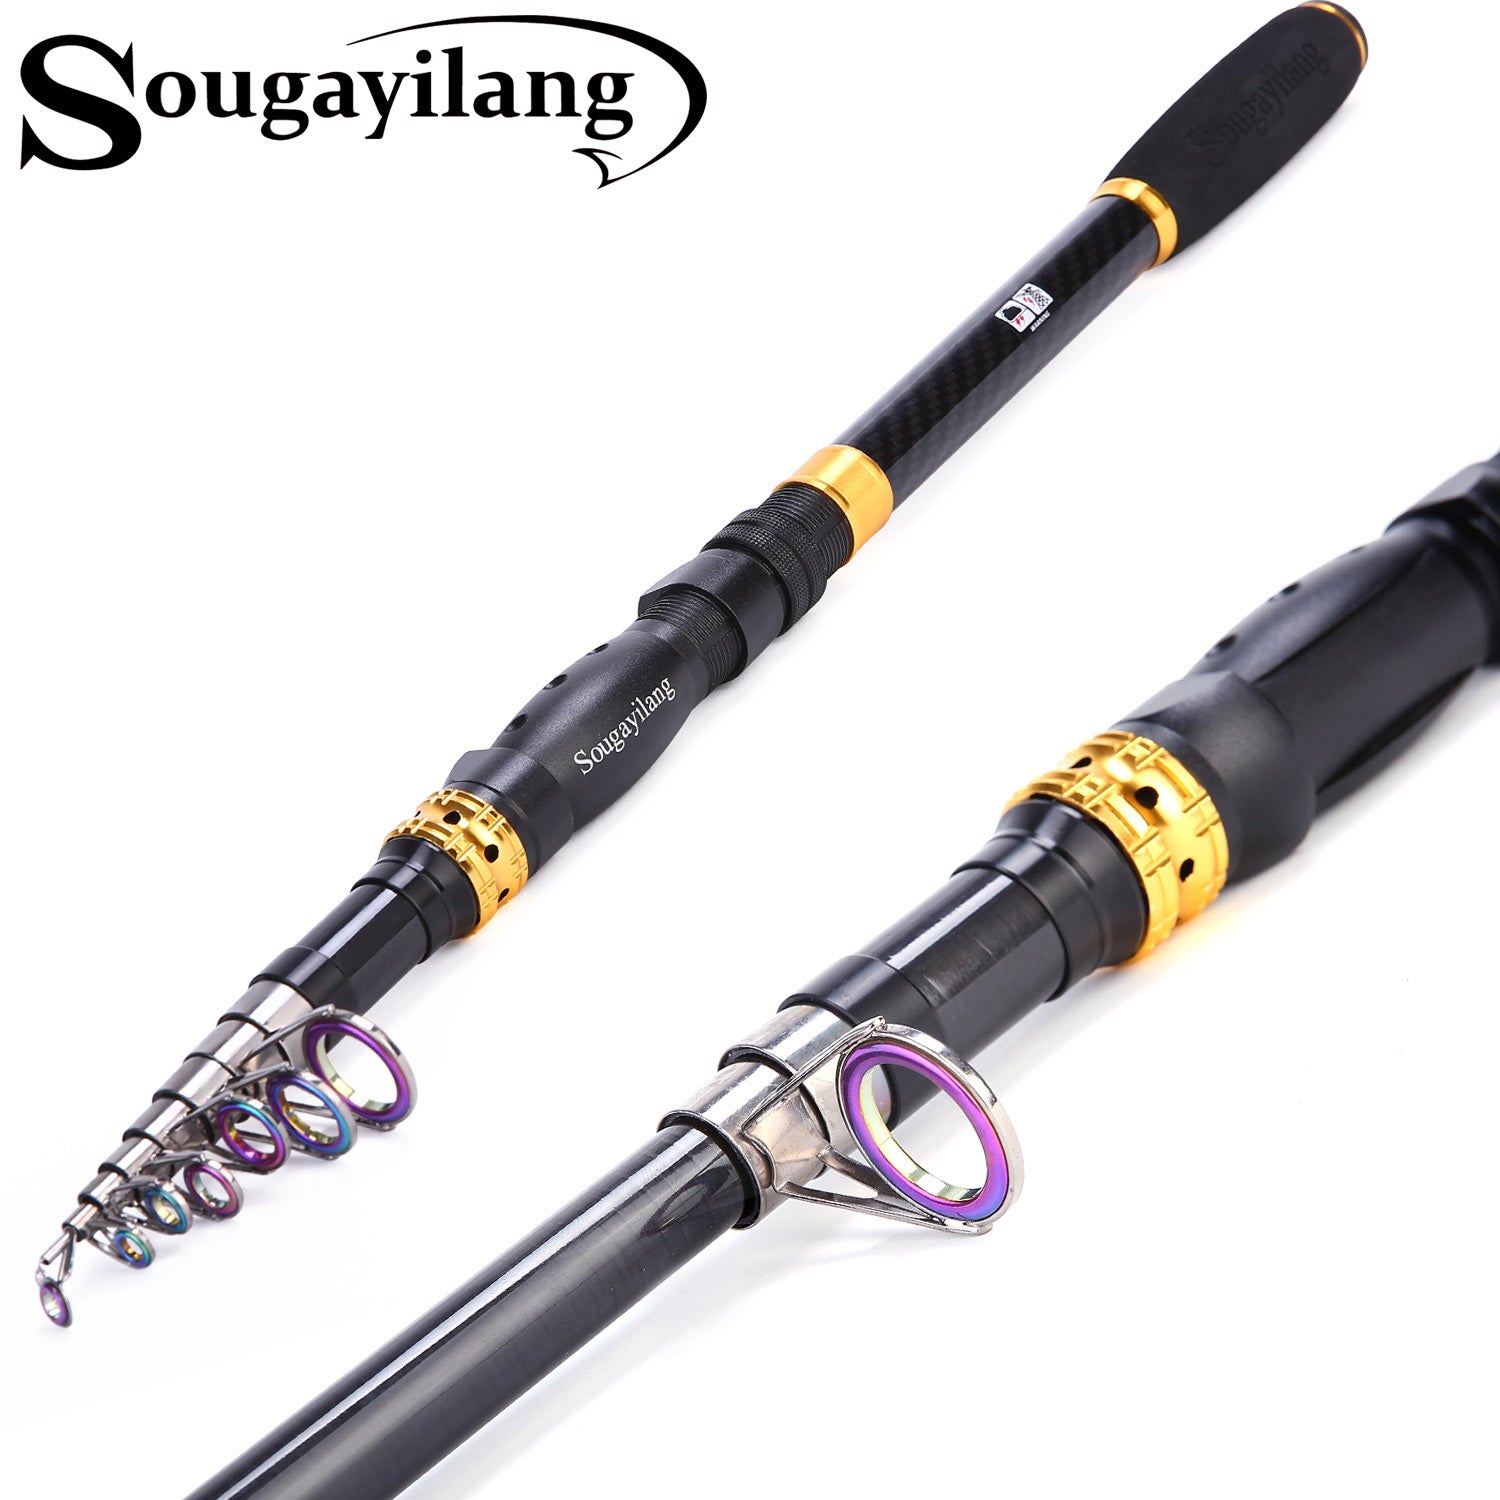 Sougayilang Telescopic Fishing Rod - 24 Ton Carbon Fiber Ultralight Fishing  Pole with CNC Reel Seat, Portable Retractable Handle, Stainless Steel